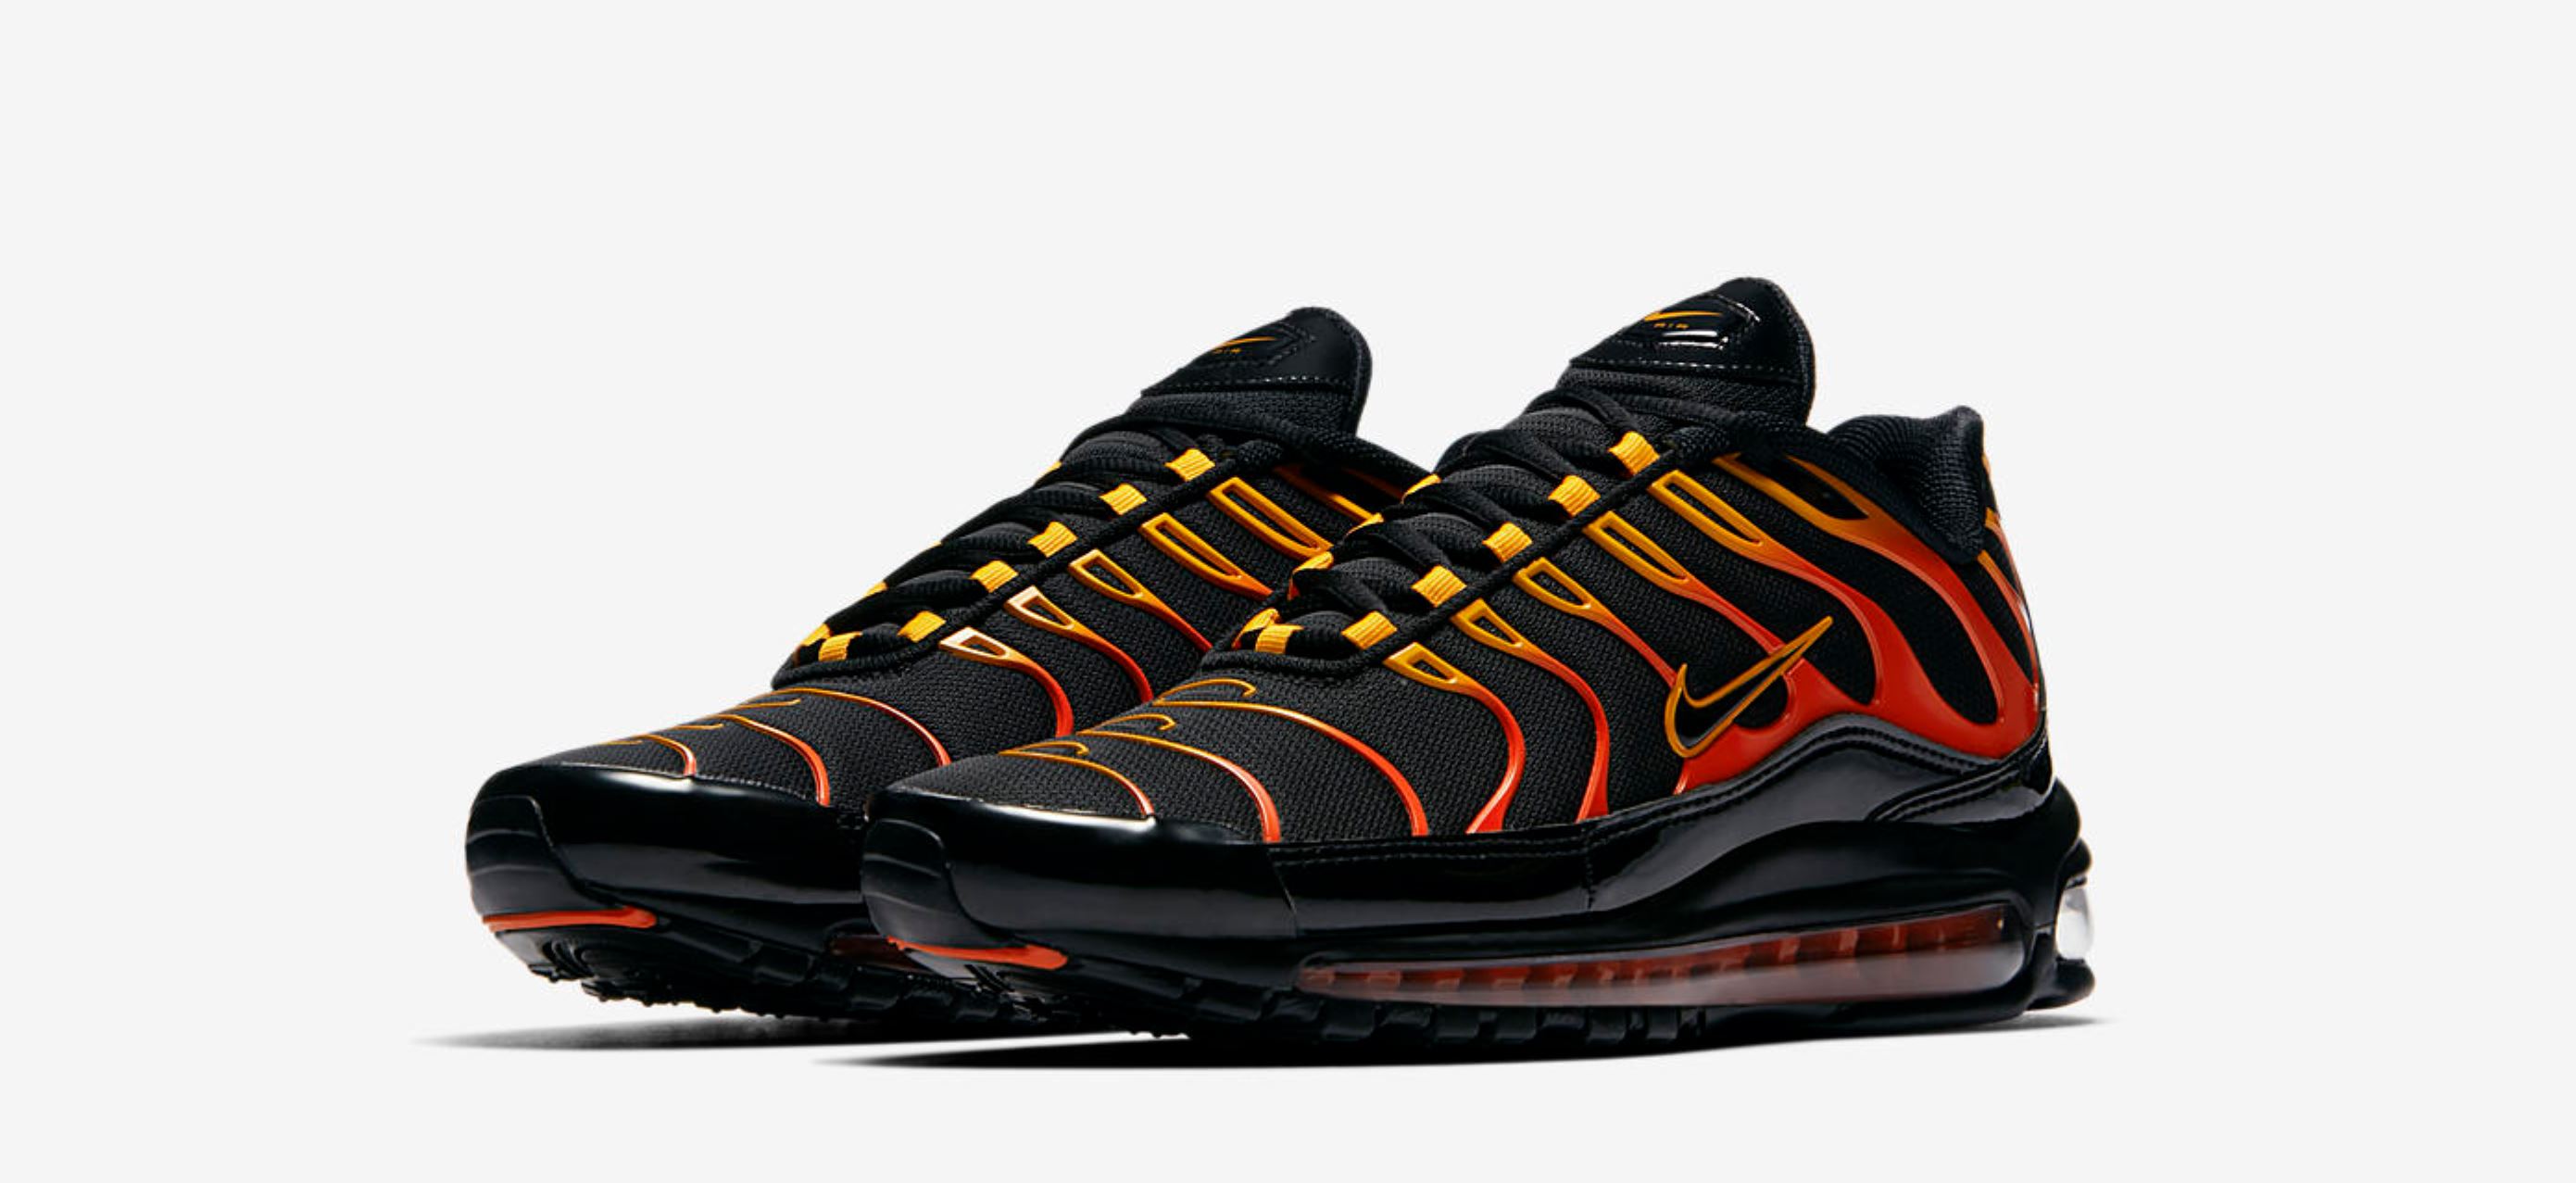 Flame On With The Nike Air Max Plus 97 Shock Orange Weartesters